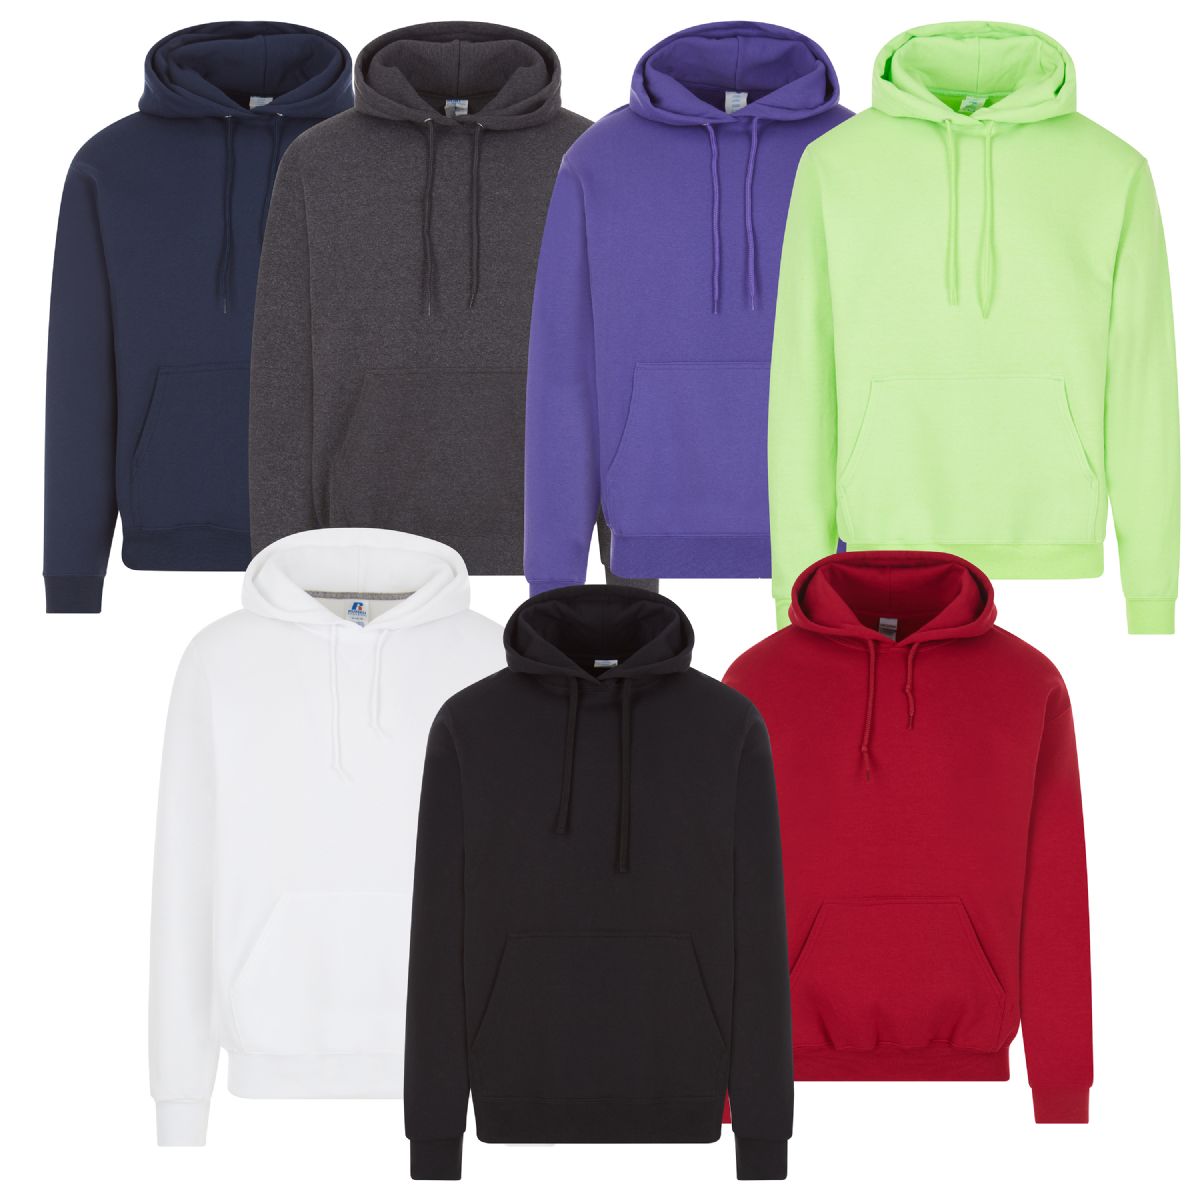 Mens Hoodies size up to 4XL